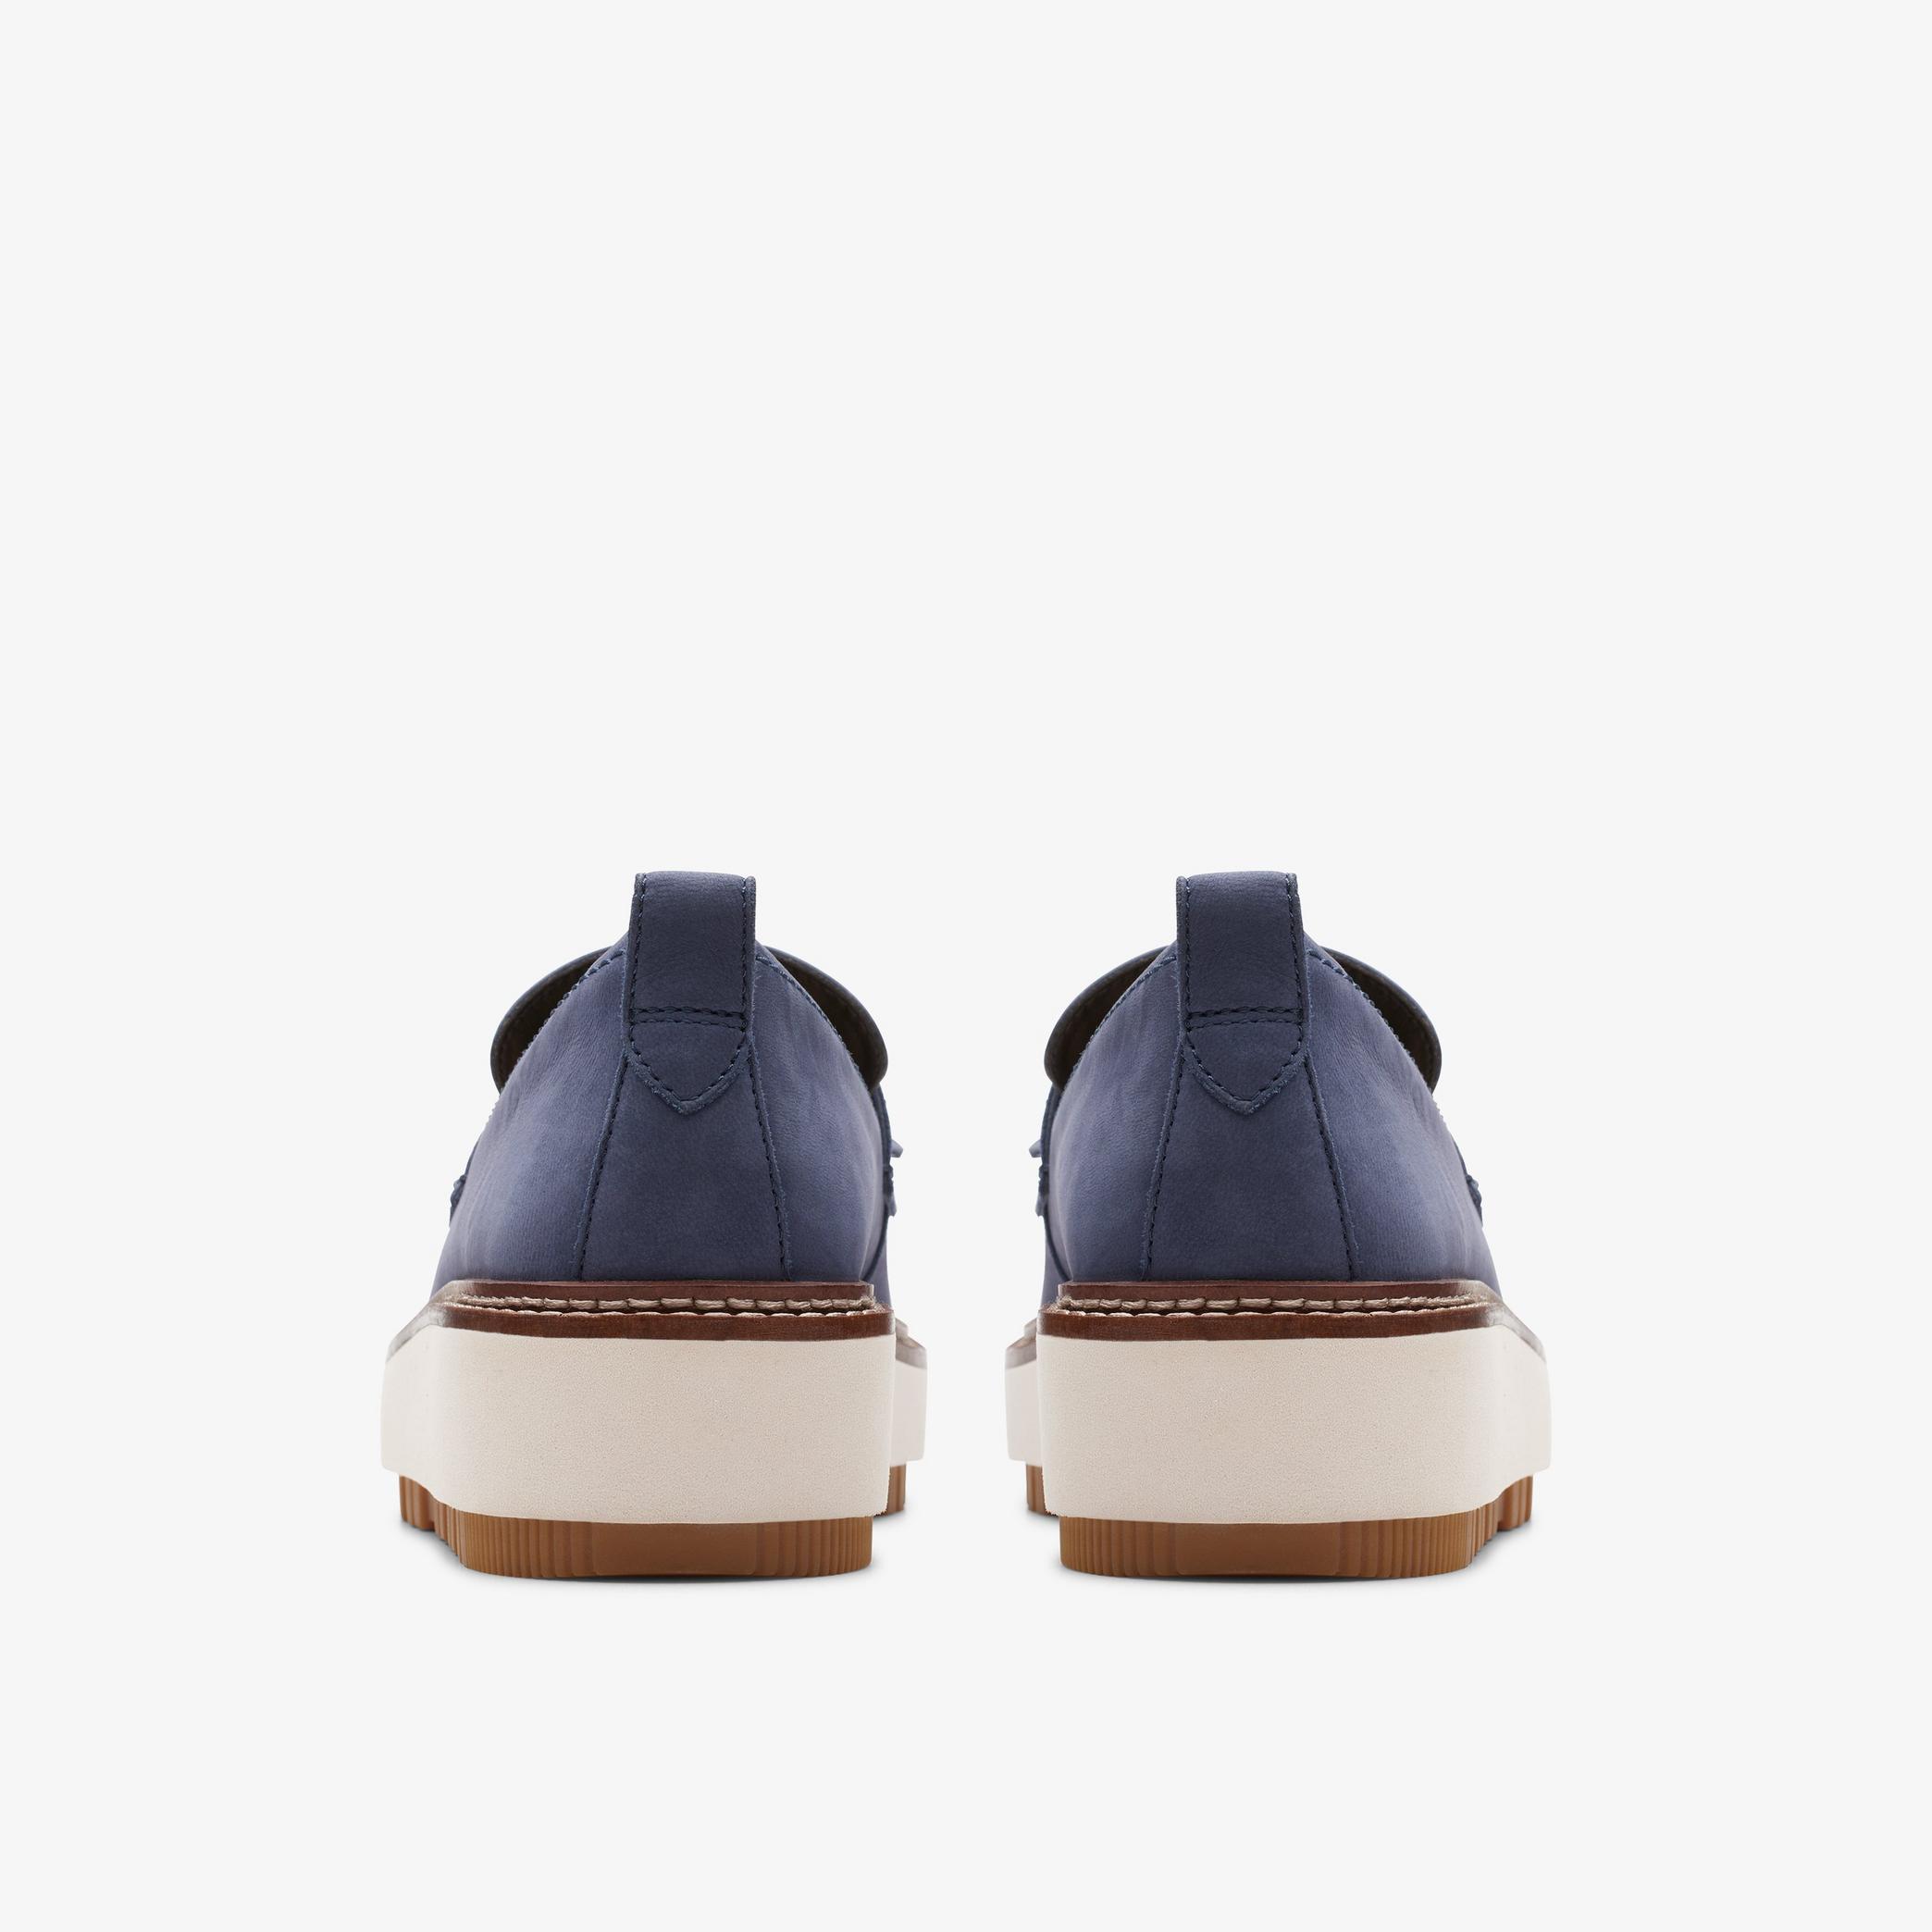 Orianna Loafer Navy Nubuck Loafers, view 7 of 11